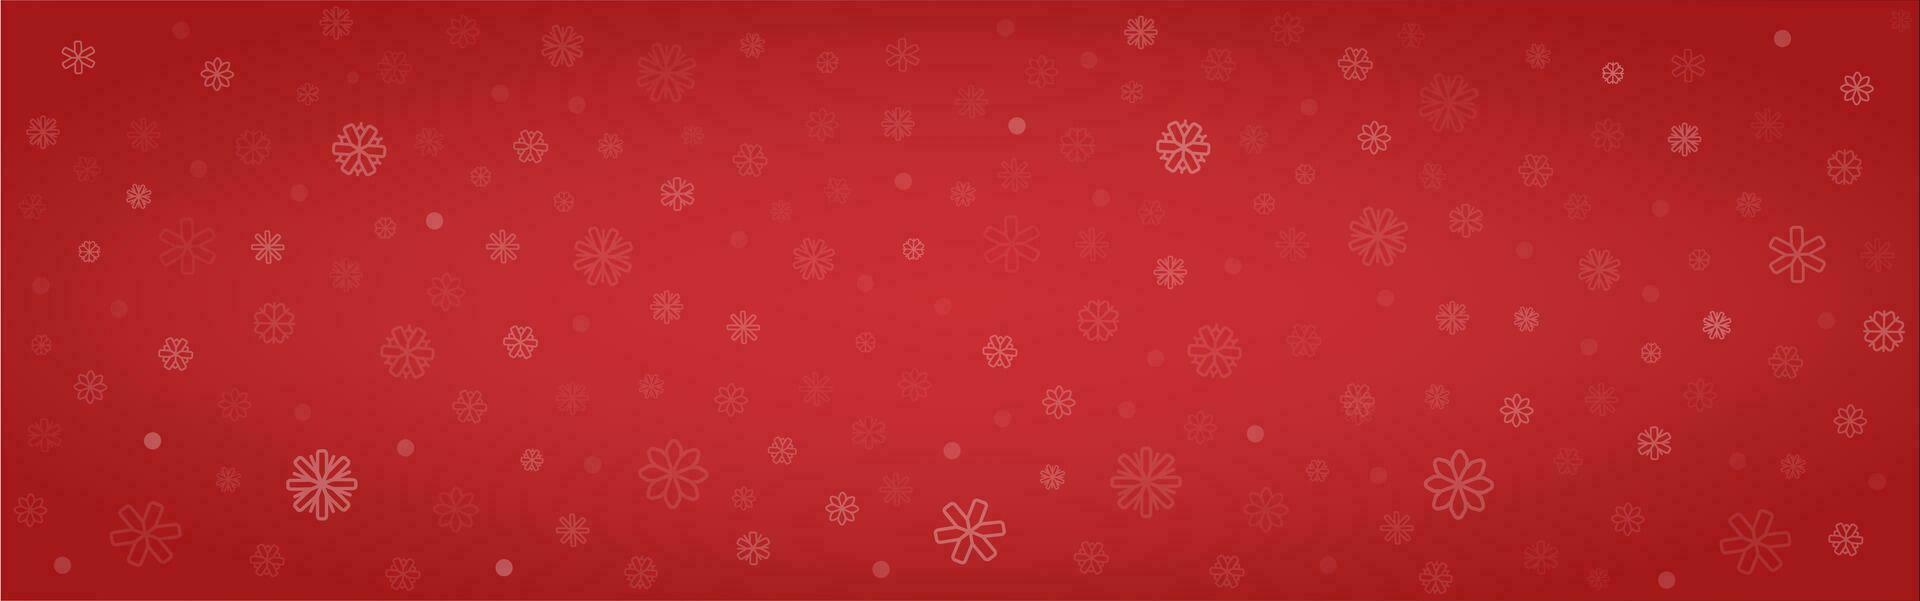 Horizontal background with snowflakes and snowfall. Abstract red  background. Christmas backdrop. Winter Christmas and New Year background. Vector illustration.